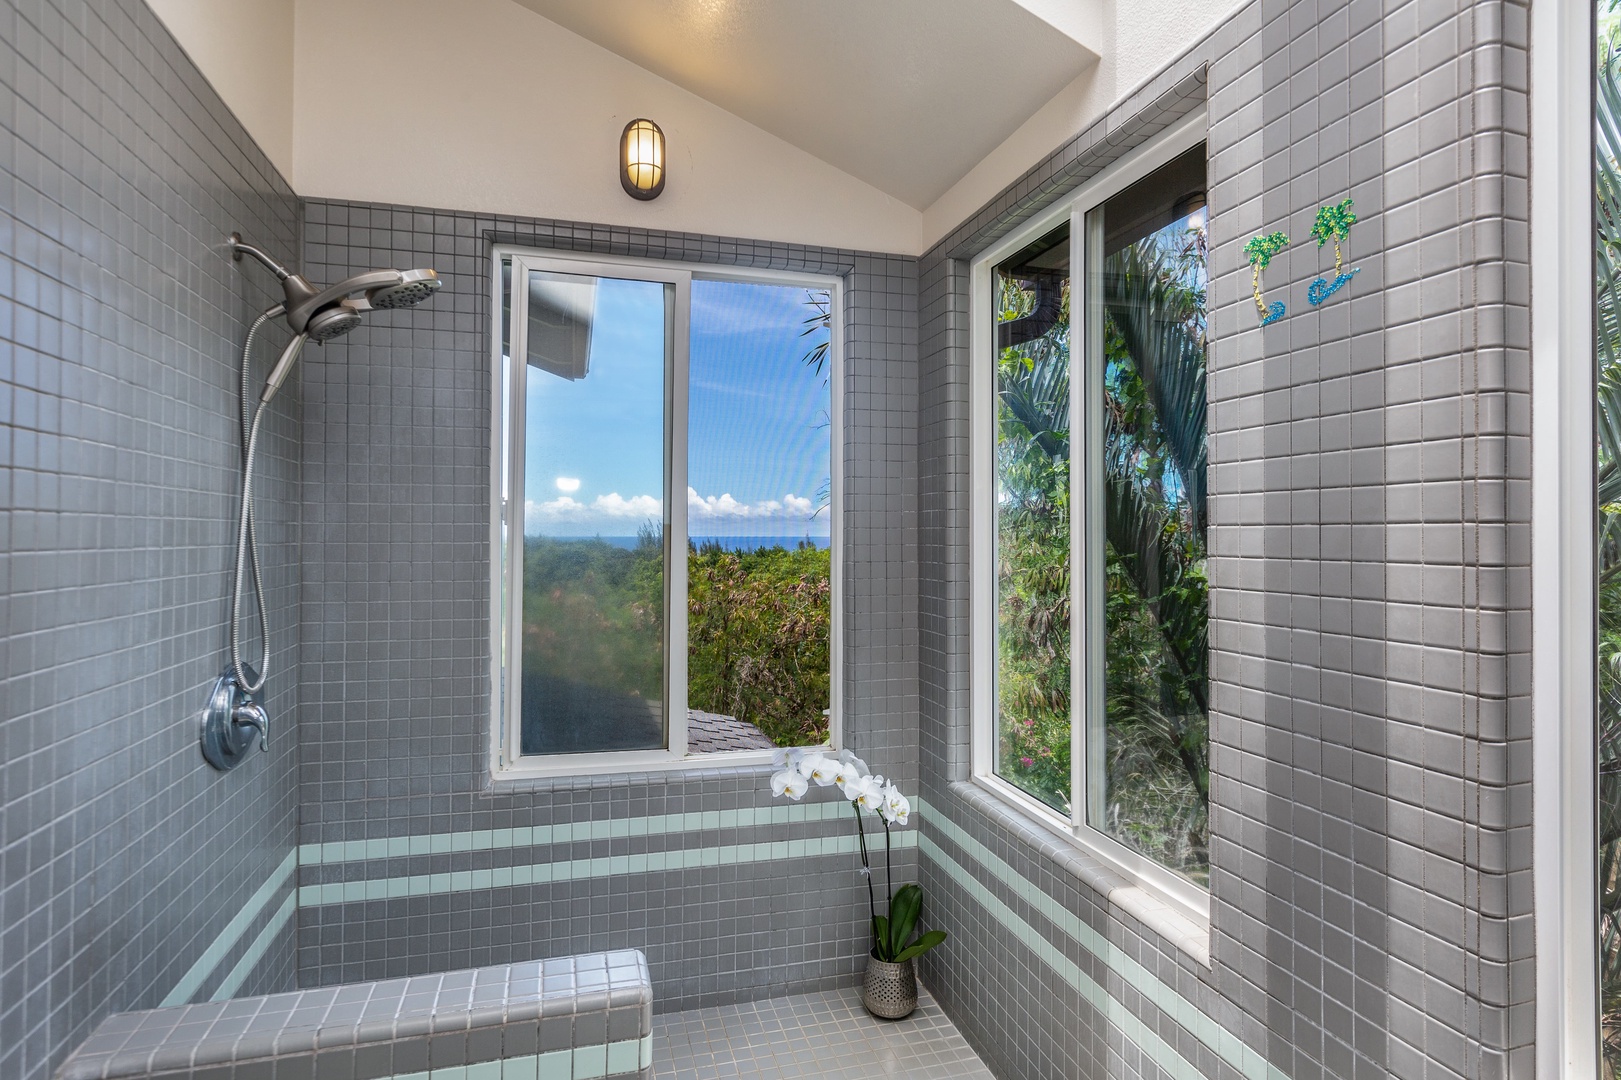 Princeville Vacation Rentals, Hale Ohia - Plus, a beautifully tiled walk-in shower with gorgeous views